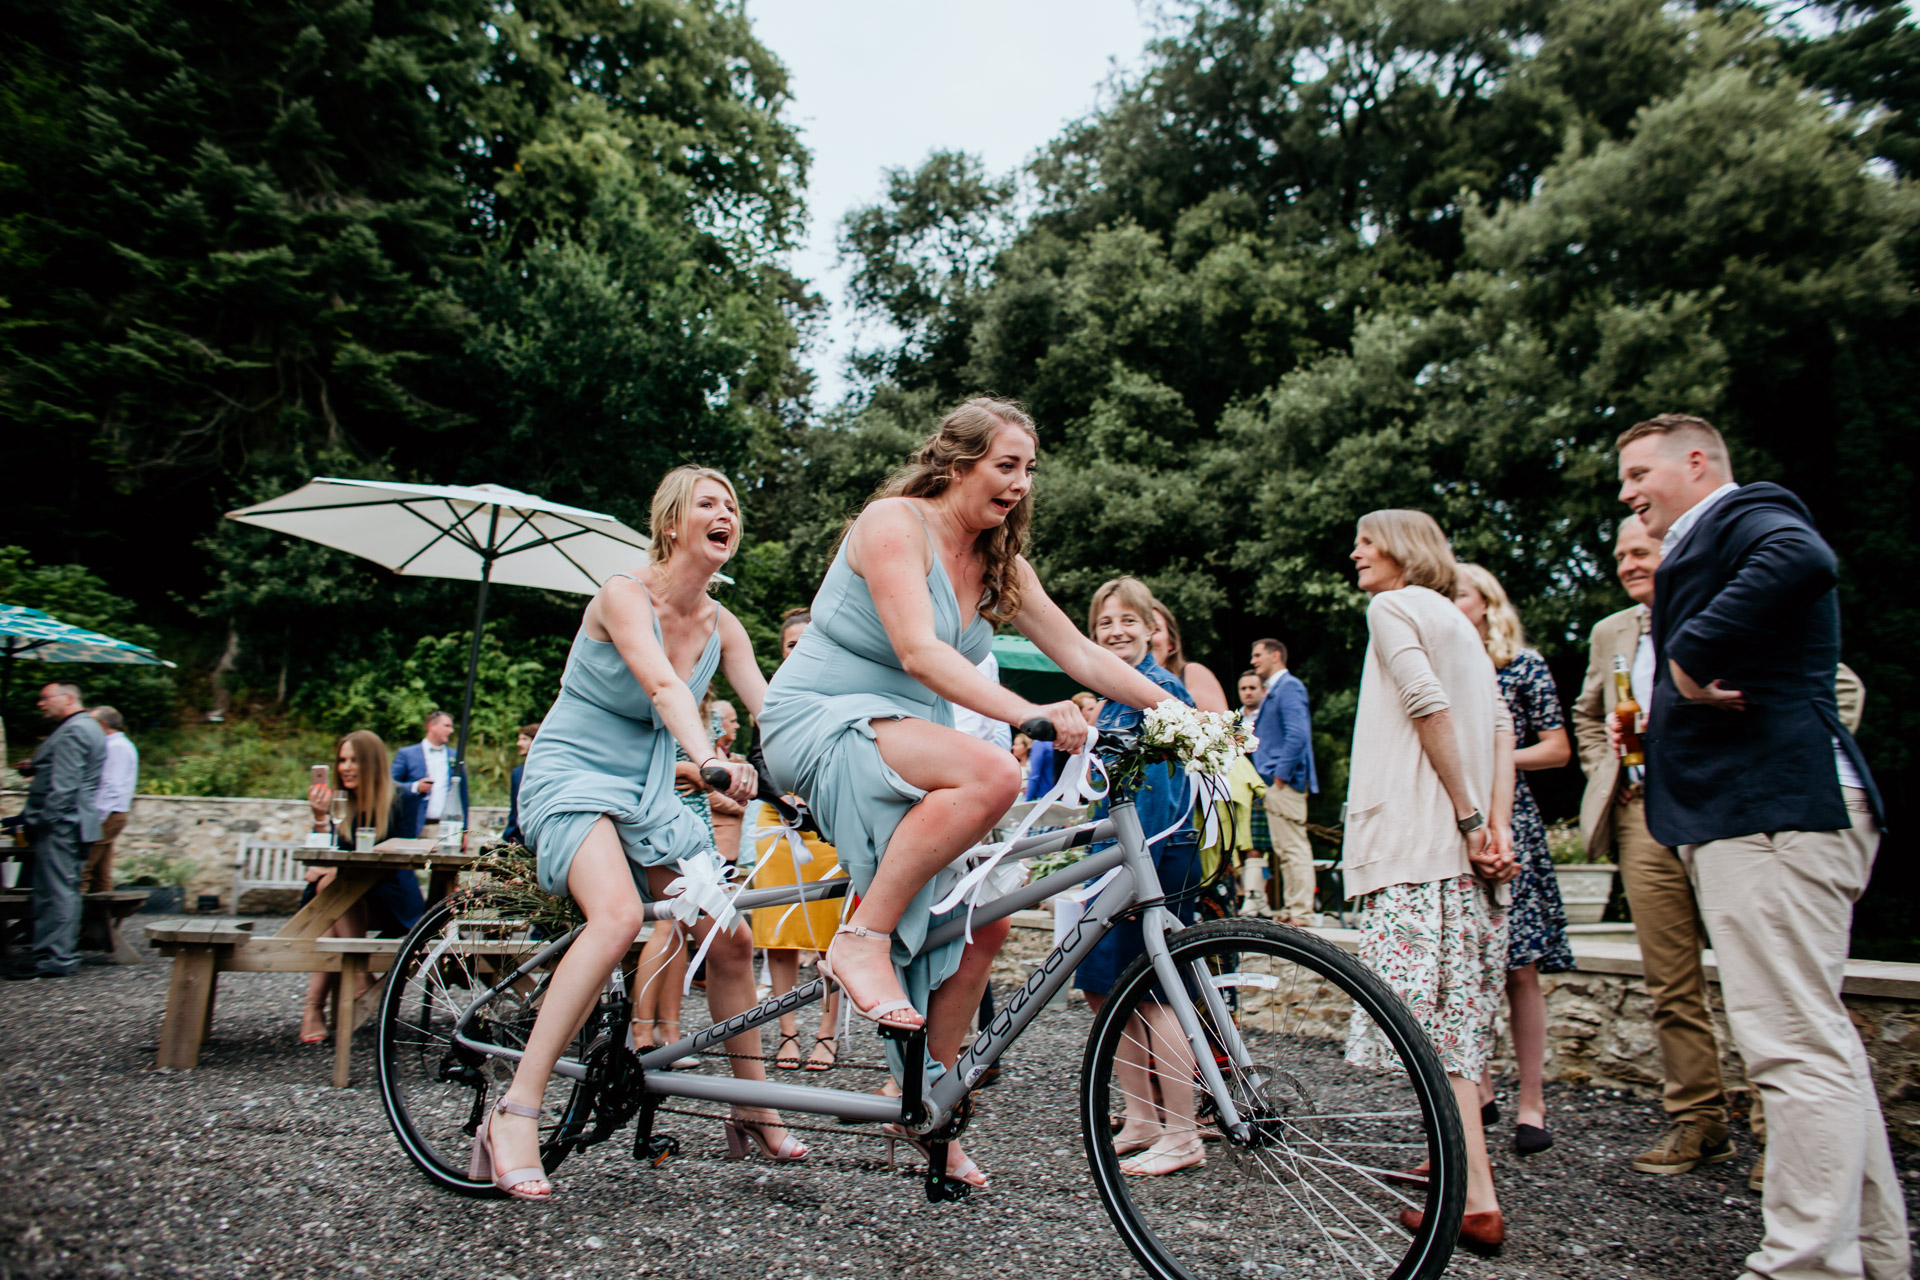 bridesmaids riding on a tandem bike at a wedding and laughing